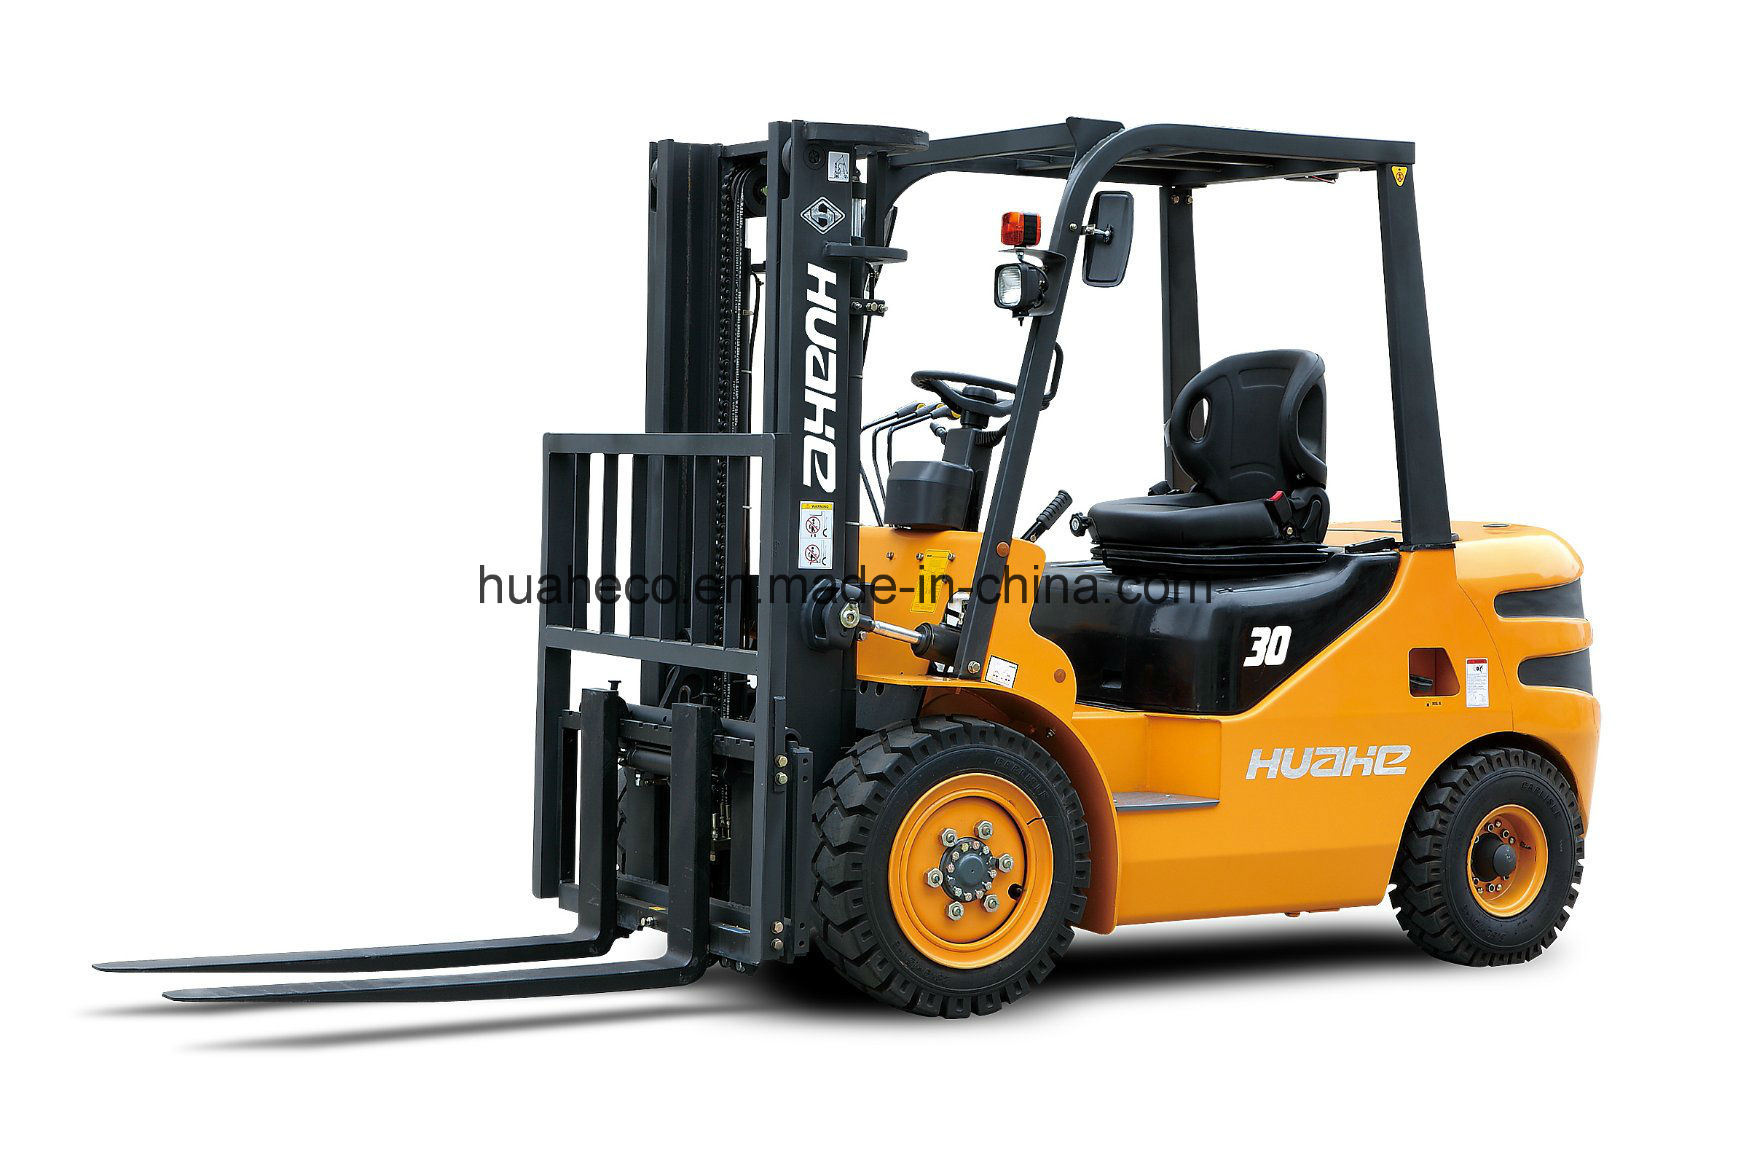 3.0Ton Diesel Forklift Truck with Chinese Engine (HH30Z-N1-D, Huahe ...